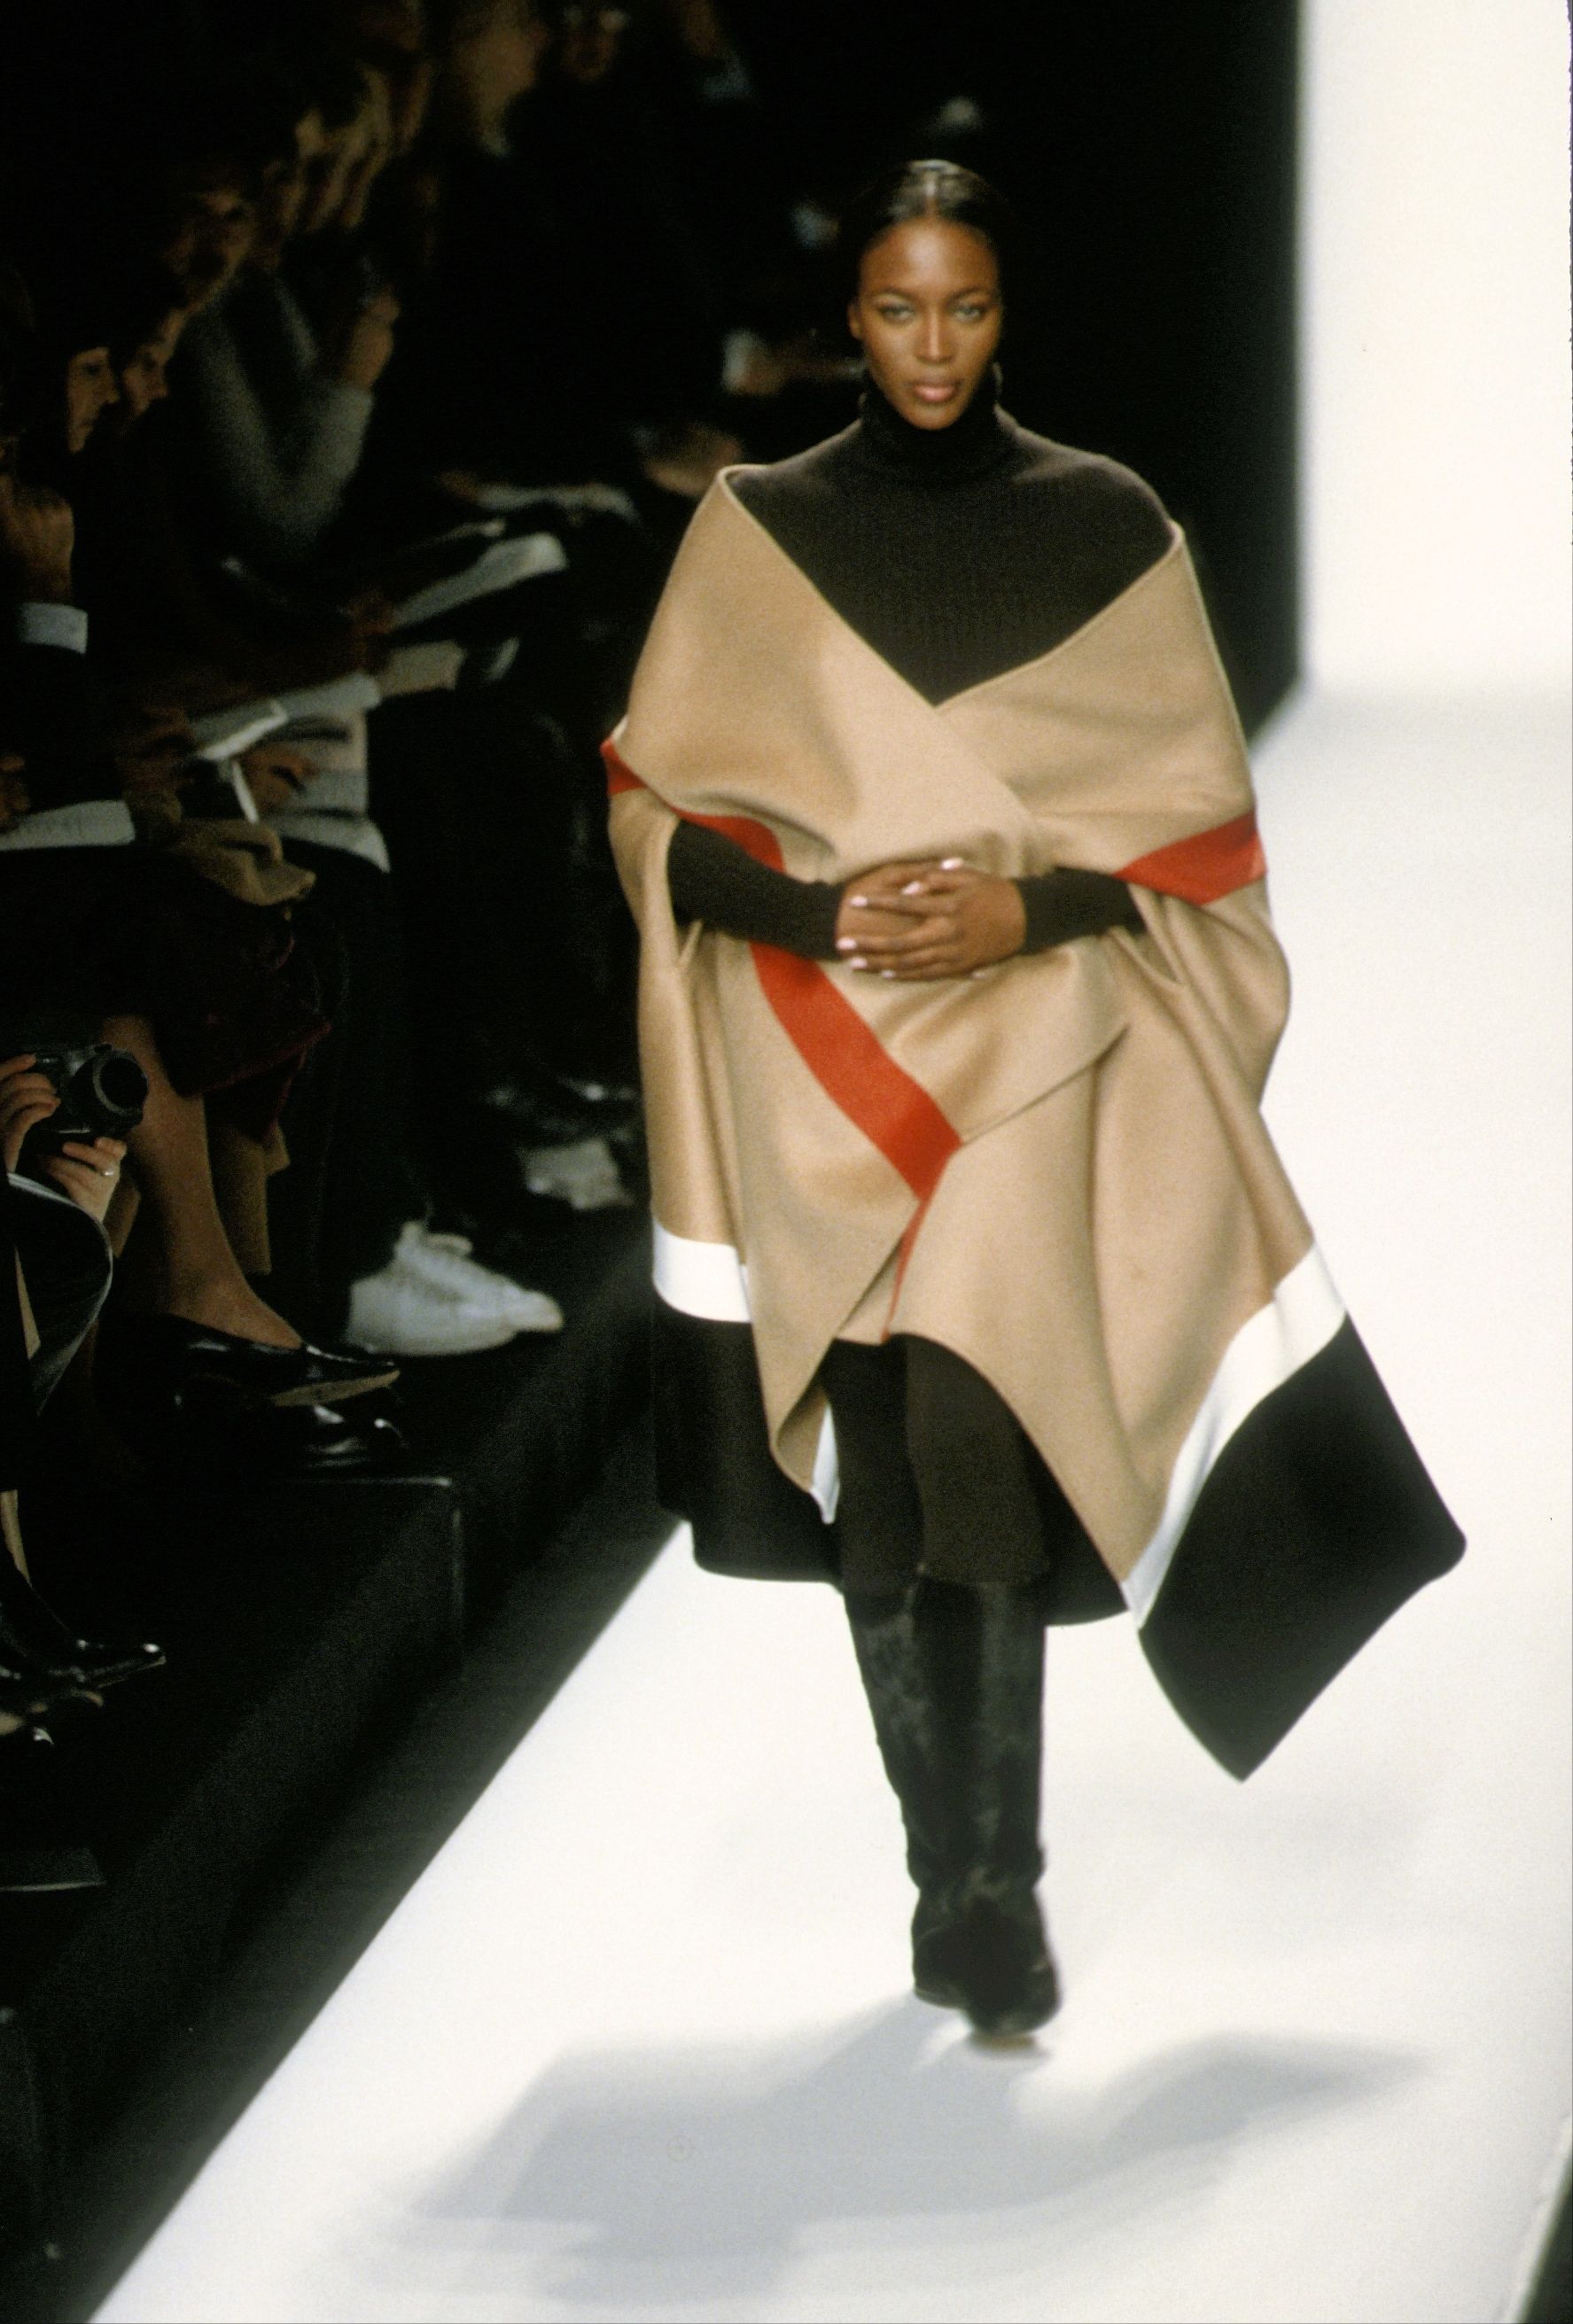 Michael Kors Rereleasing Iconic Cape Worn by Joan Didion & Naomi Campbell